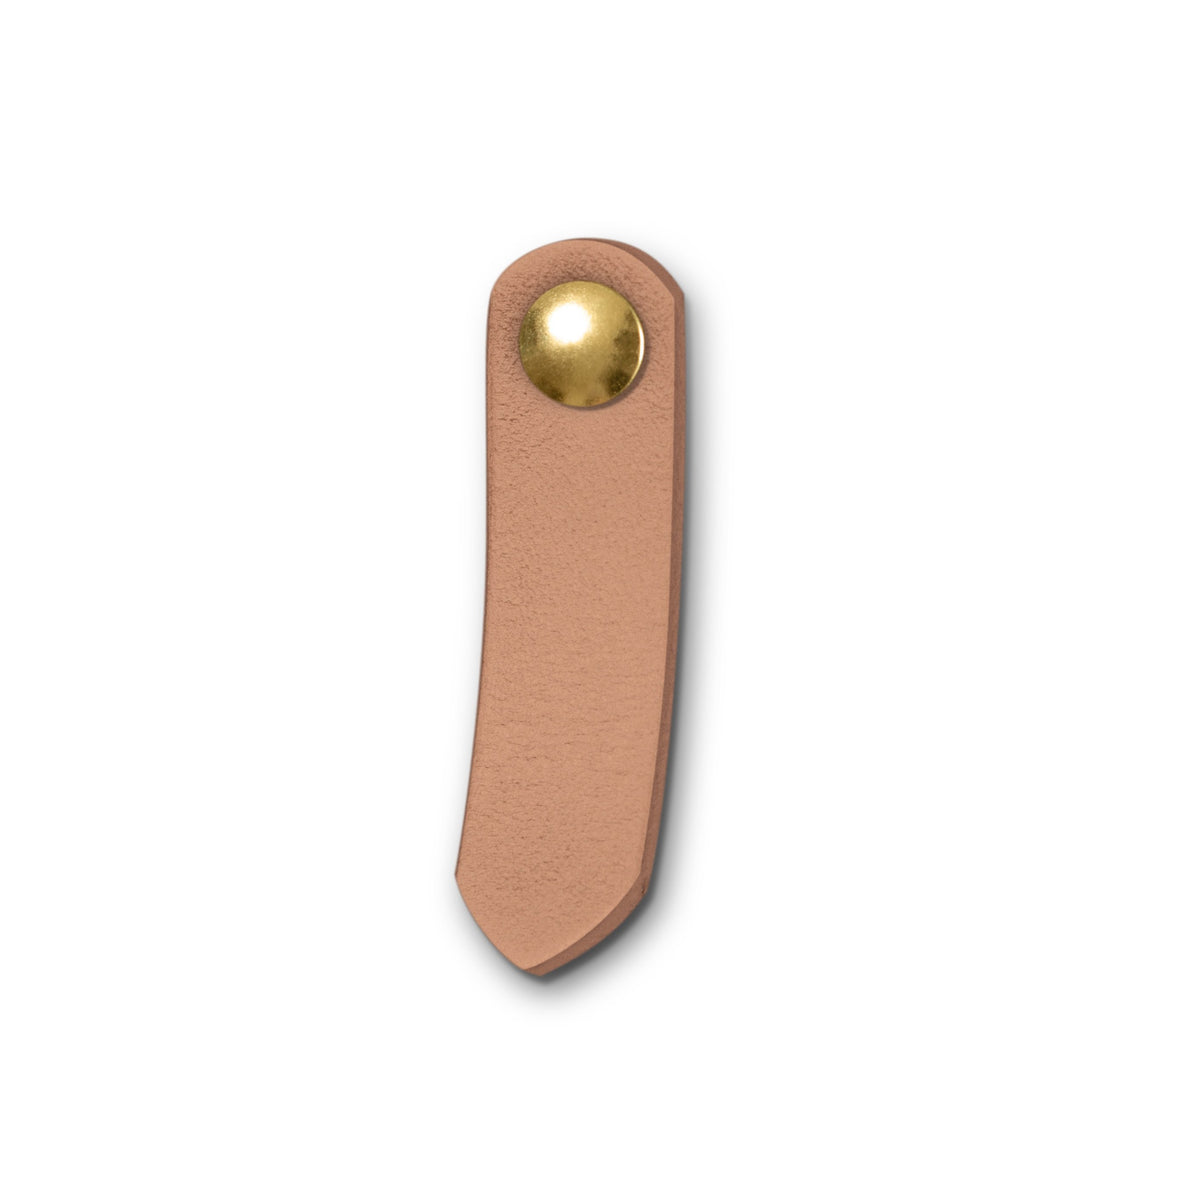 Walnut Studiolo Drawer Pulls Leather Tab Pull - The St. Johns Natural / Brass